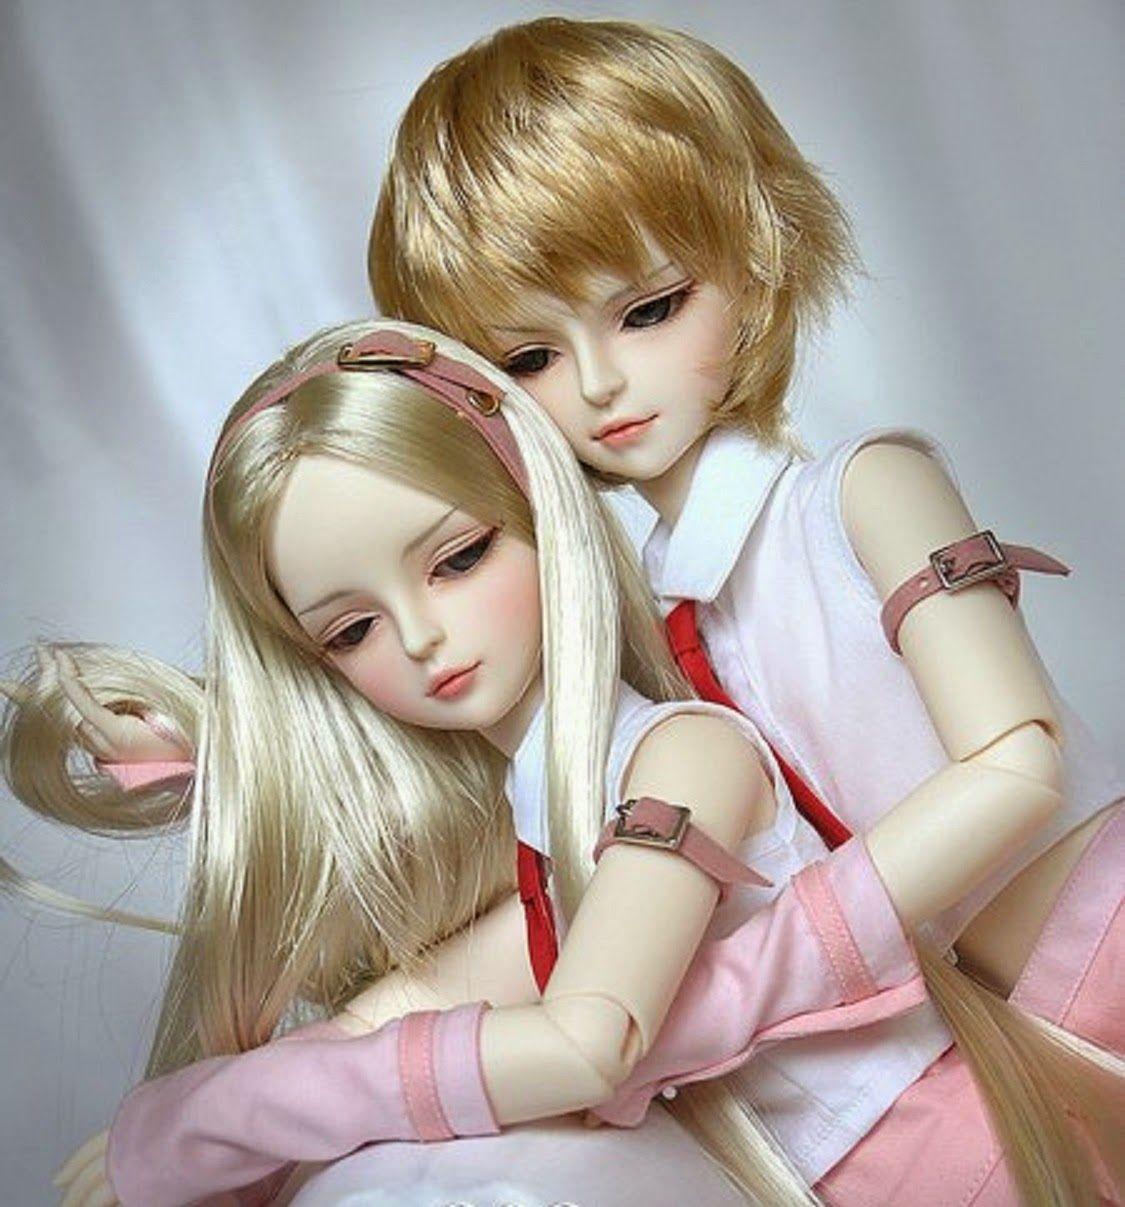 FREE ALL HD WALLPAPERS DOWNLOAD: Very Smart Couple Barbie Doll Wallpaper